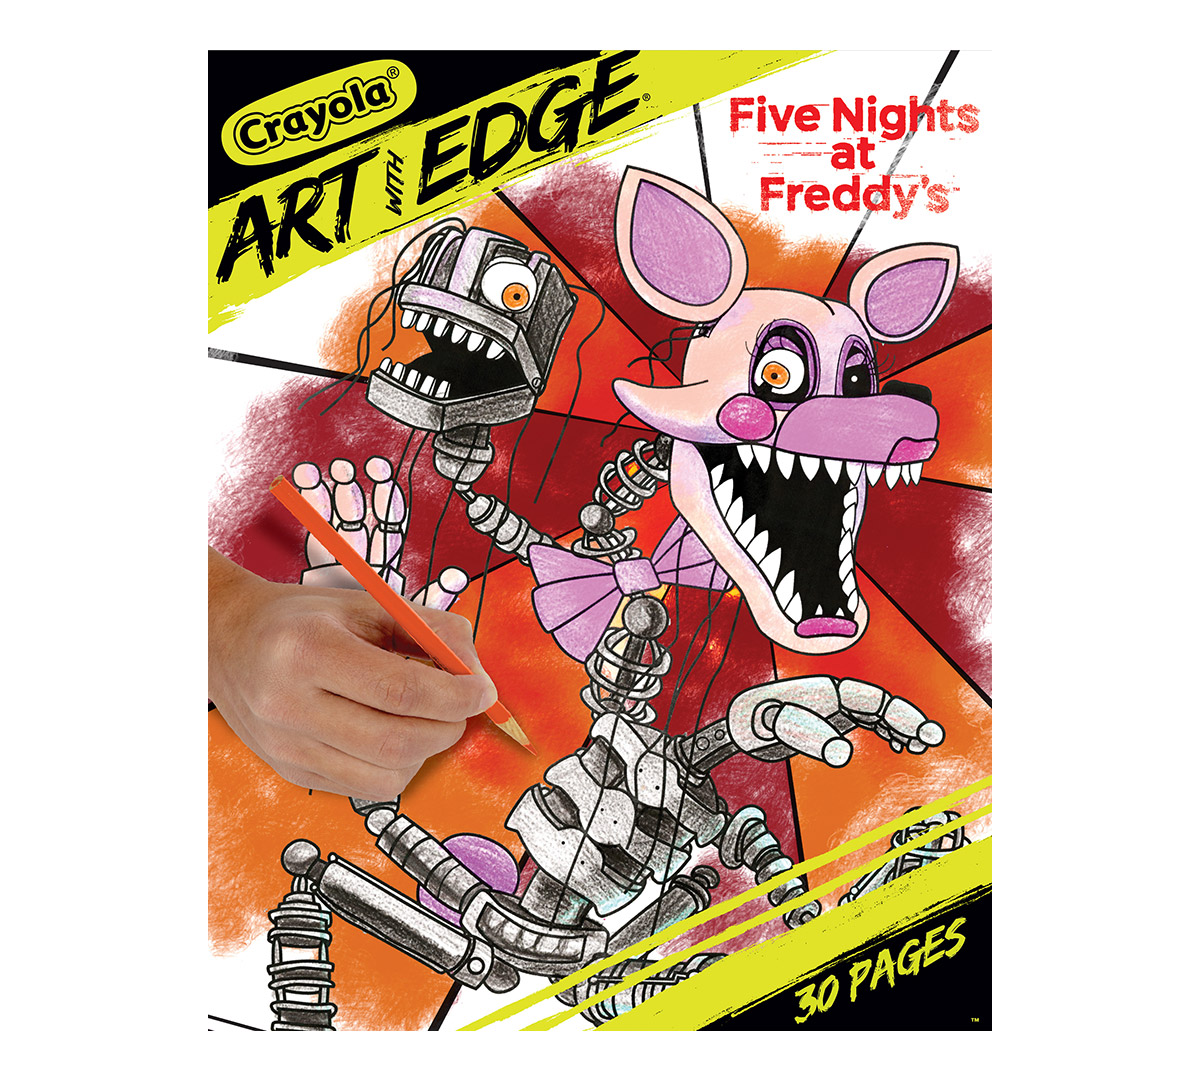 Download Crayola Art with Edge Coloring Pages, Five Nights at Freddy's, 30 Premium Coloring Pages ...